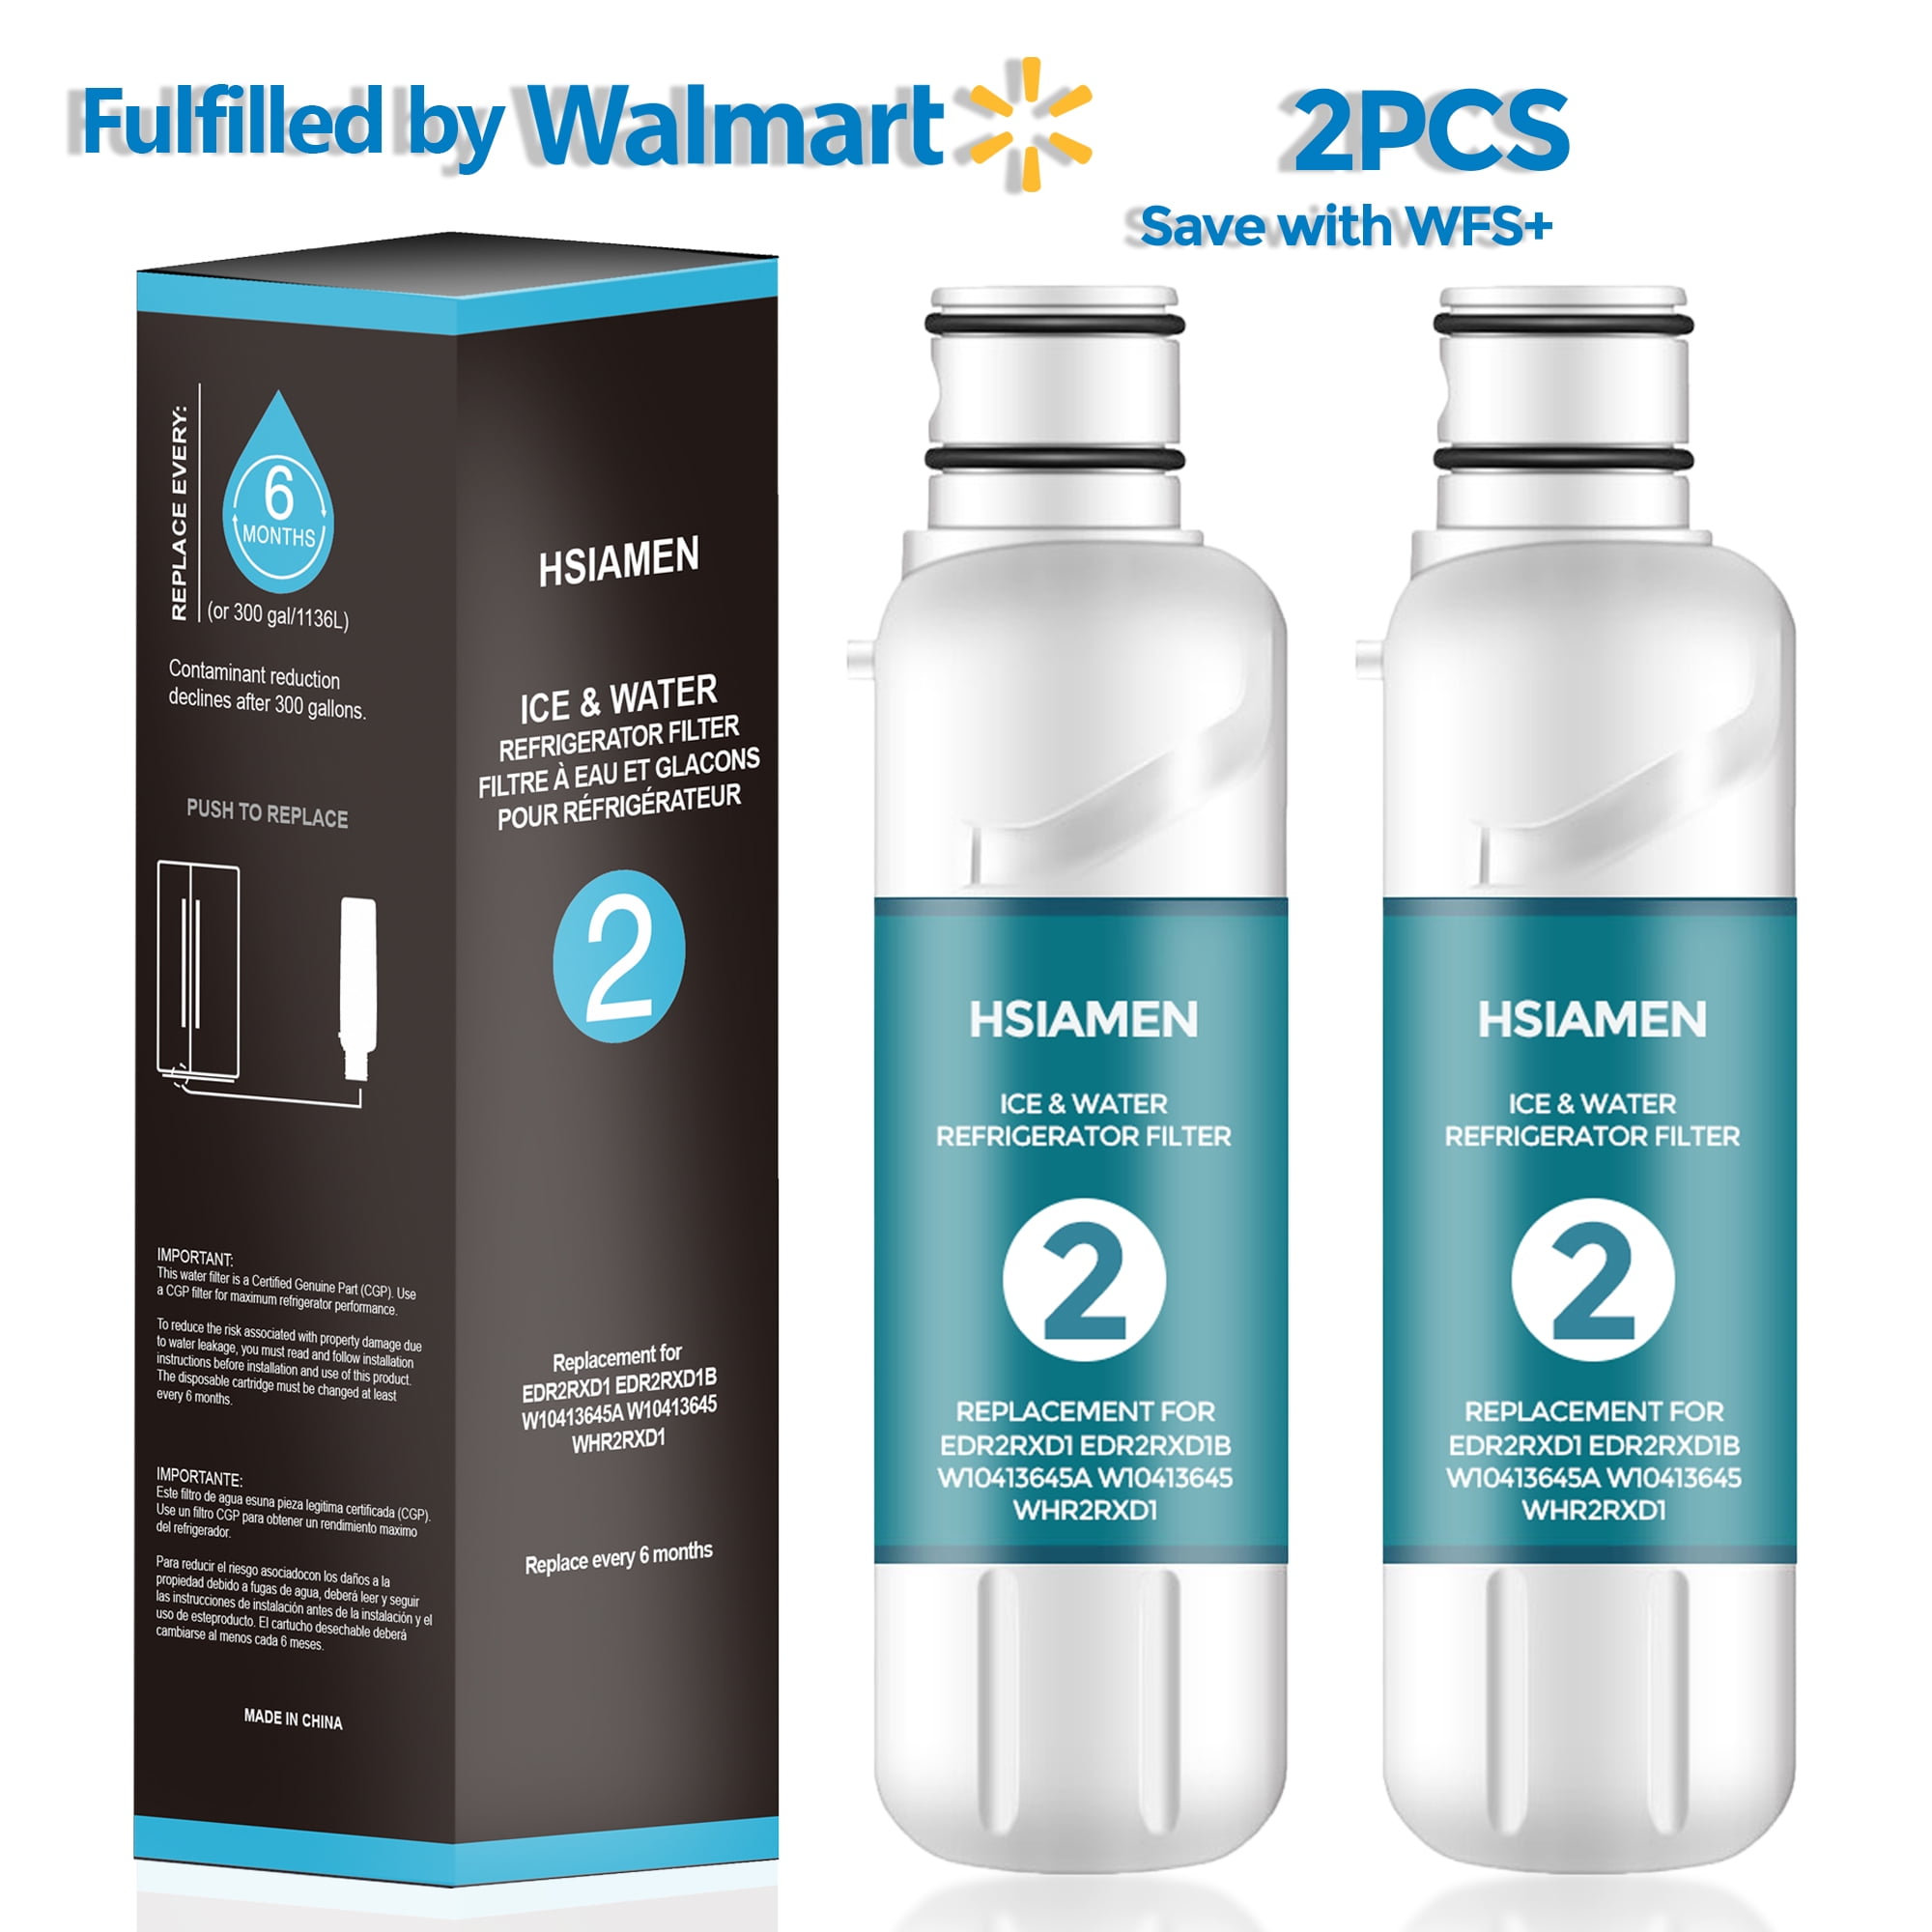 EDR2RXD1 Refrigerator Water Filter by Whirlpool, 1pk